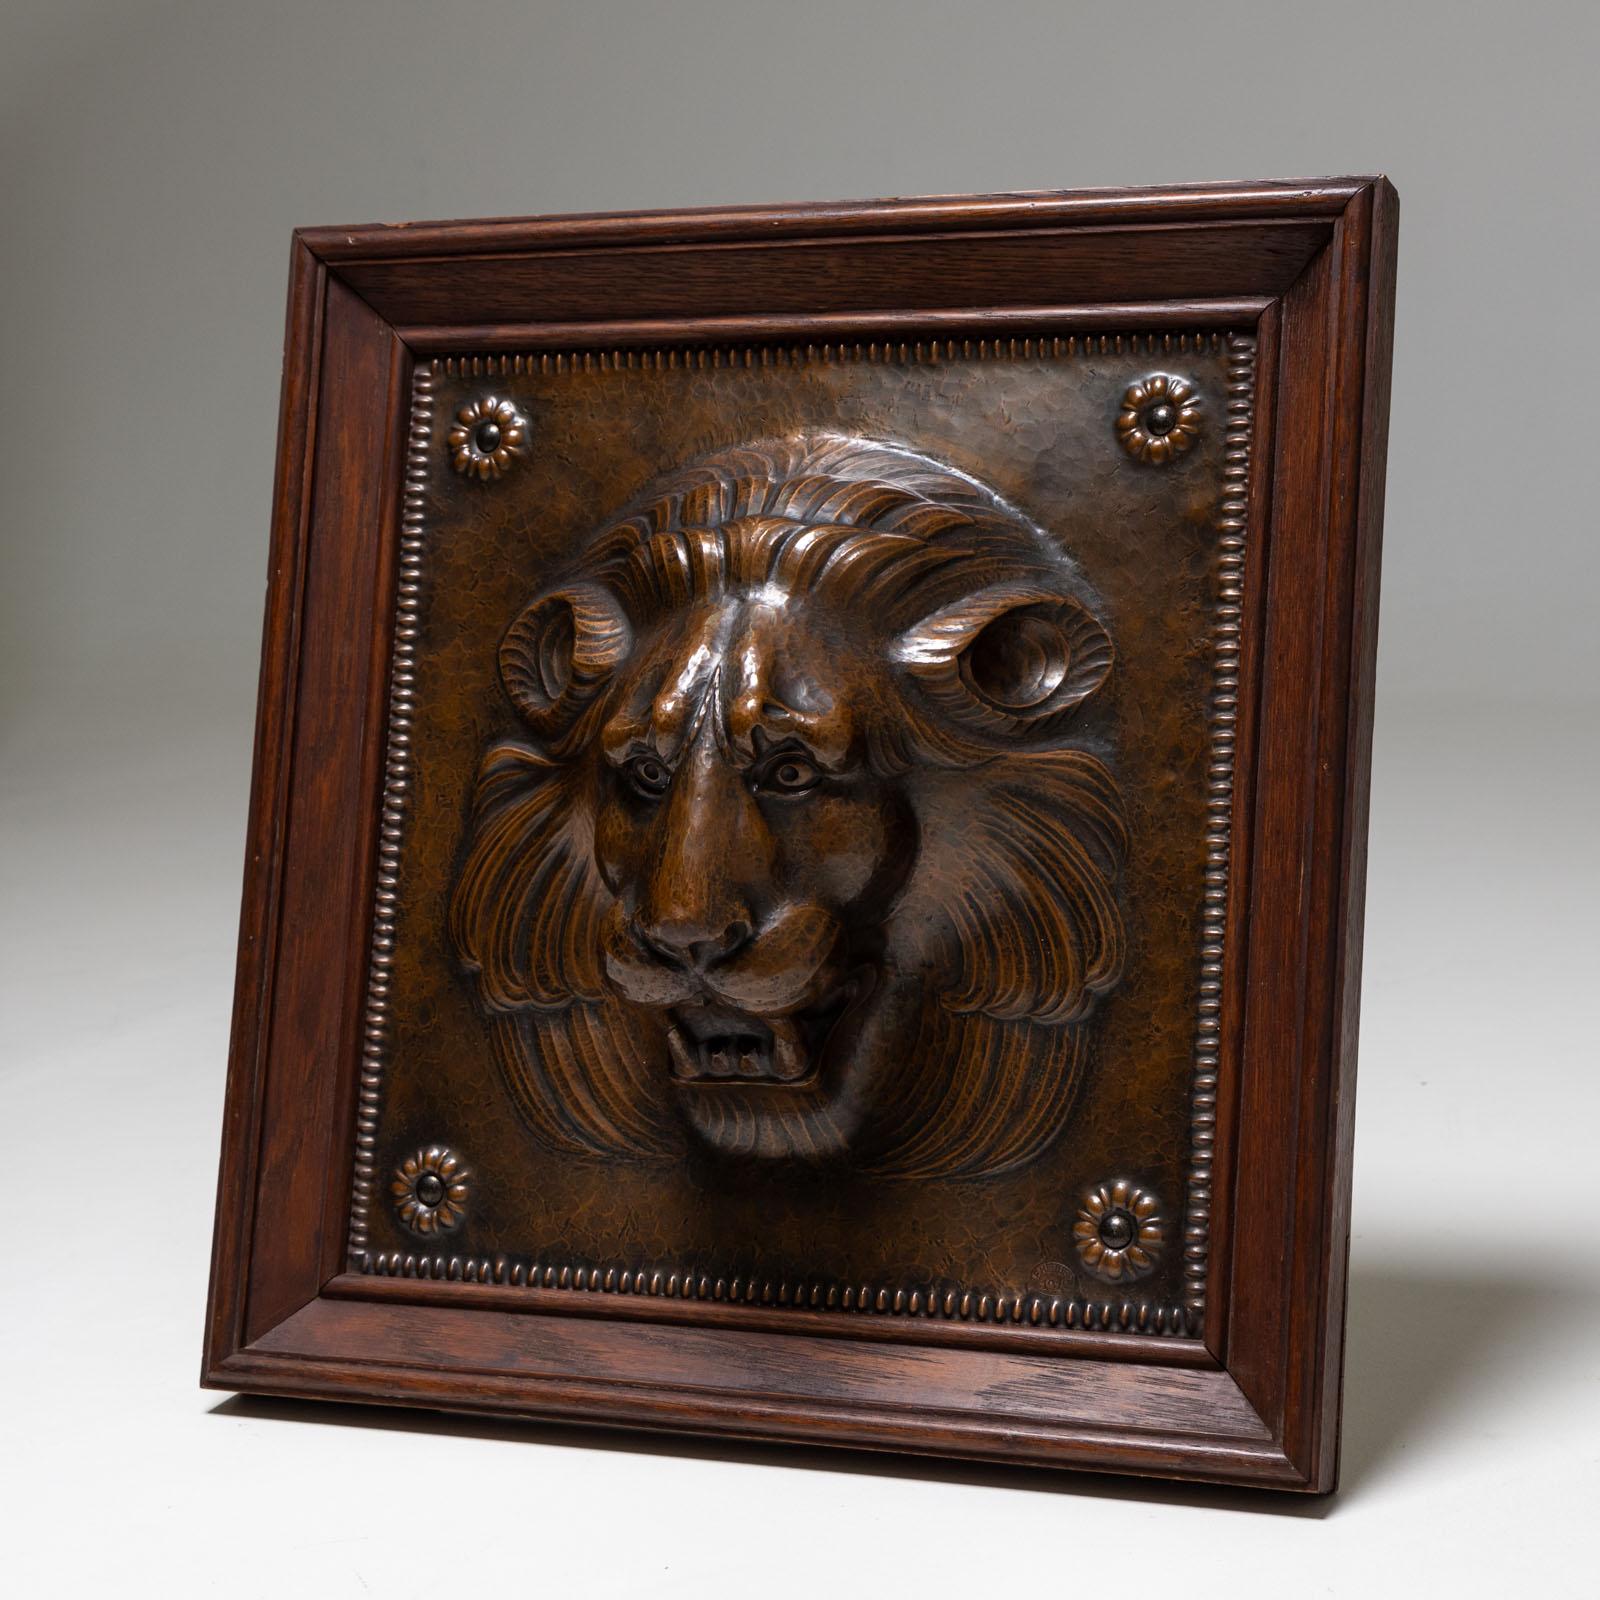 Lion protome made of embossed copper in an oak frame. Signed E. Herger, 1910, lower right. Dimensions without frame: 41.5 x 38.5 cm